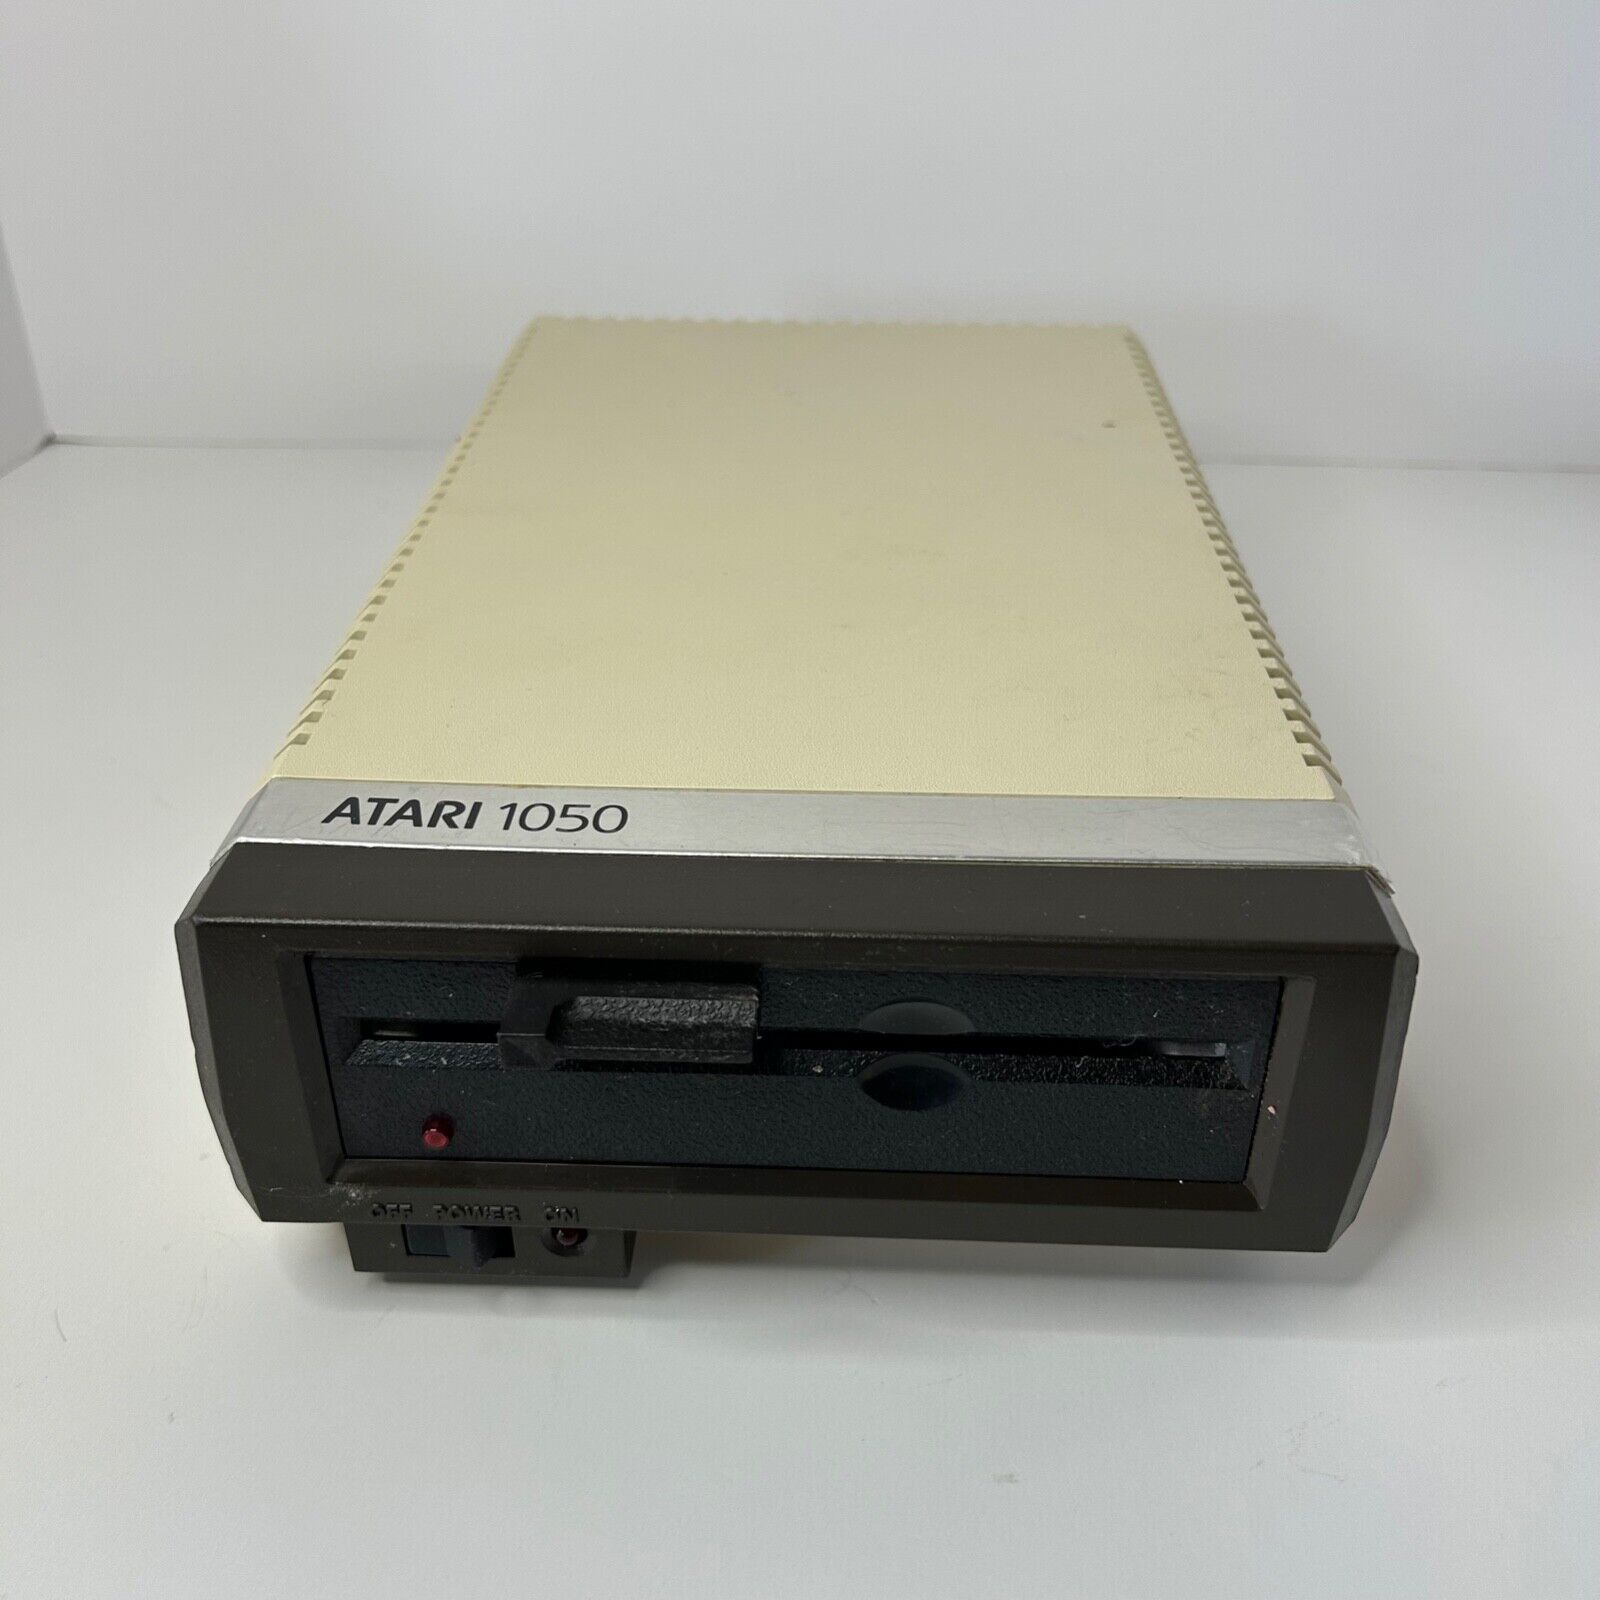 VTG Atari 1050 Floppy Disk Drive Powers On Unit Only No Power Cord